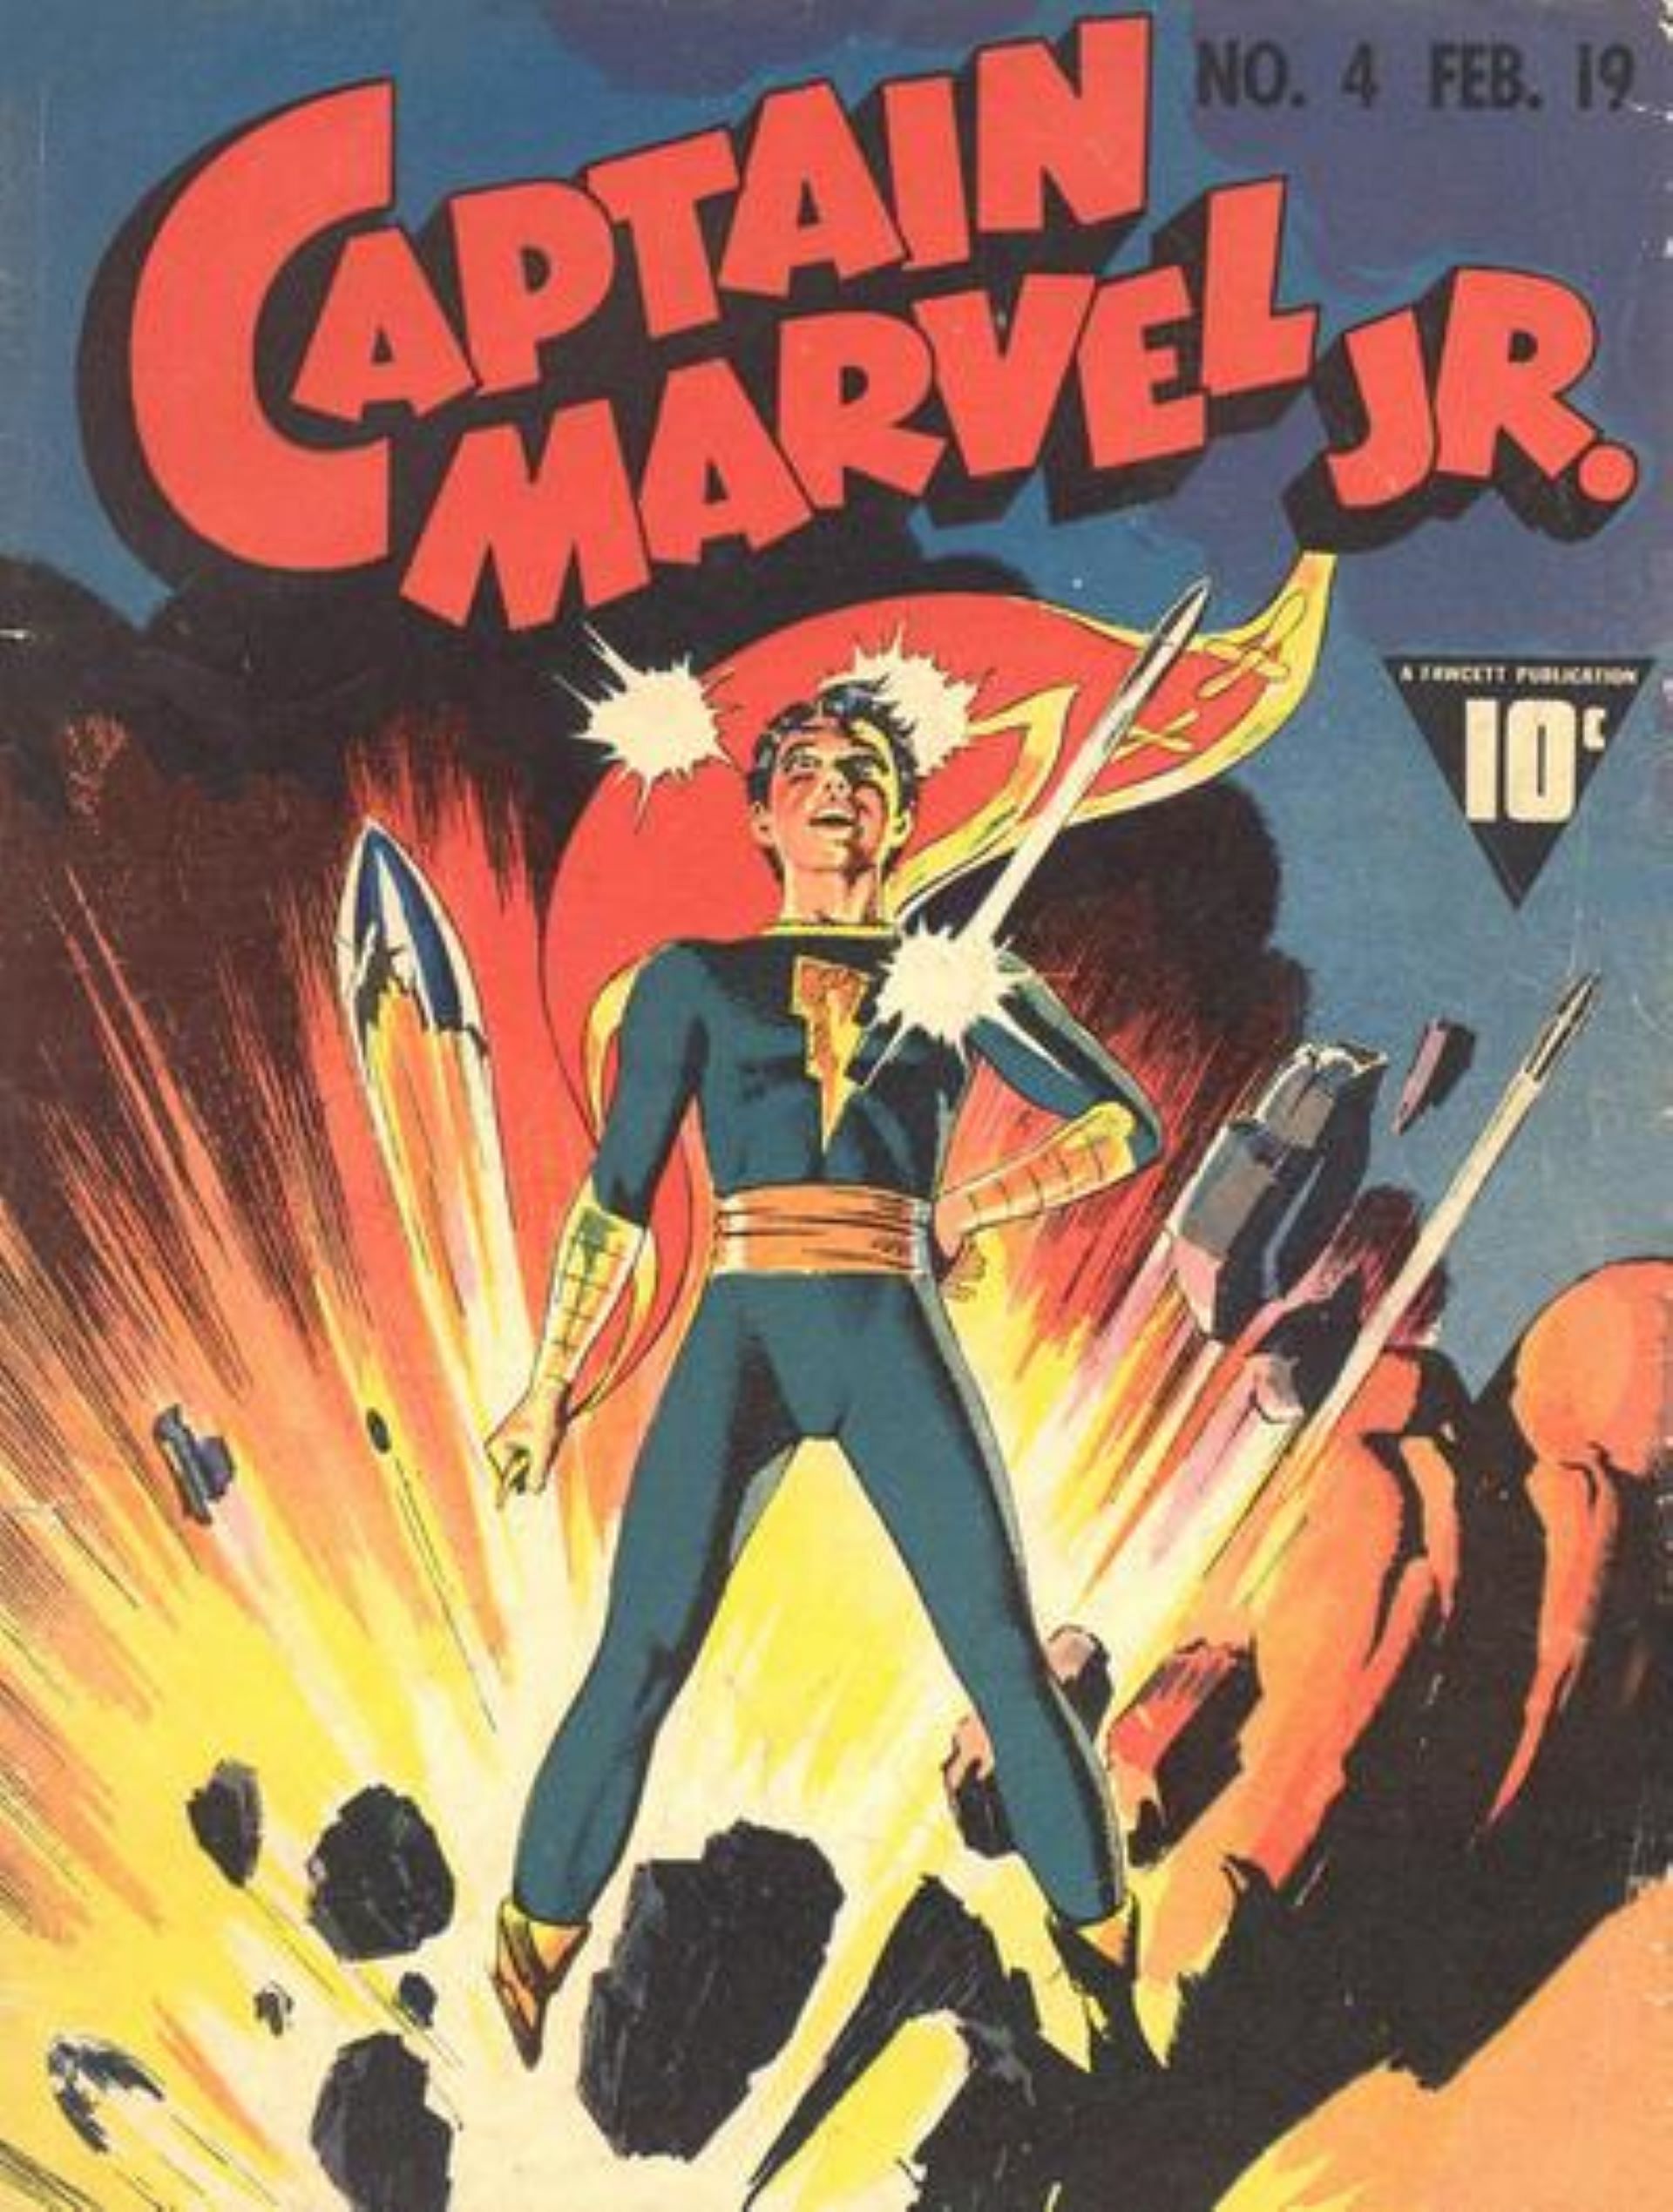 Captain Marvel Jr. was highly popular back in the day (Image via DC)